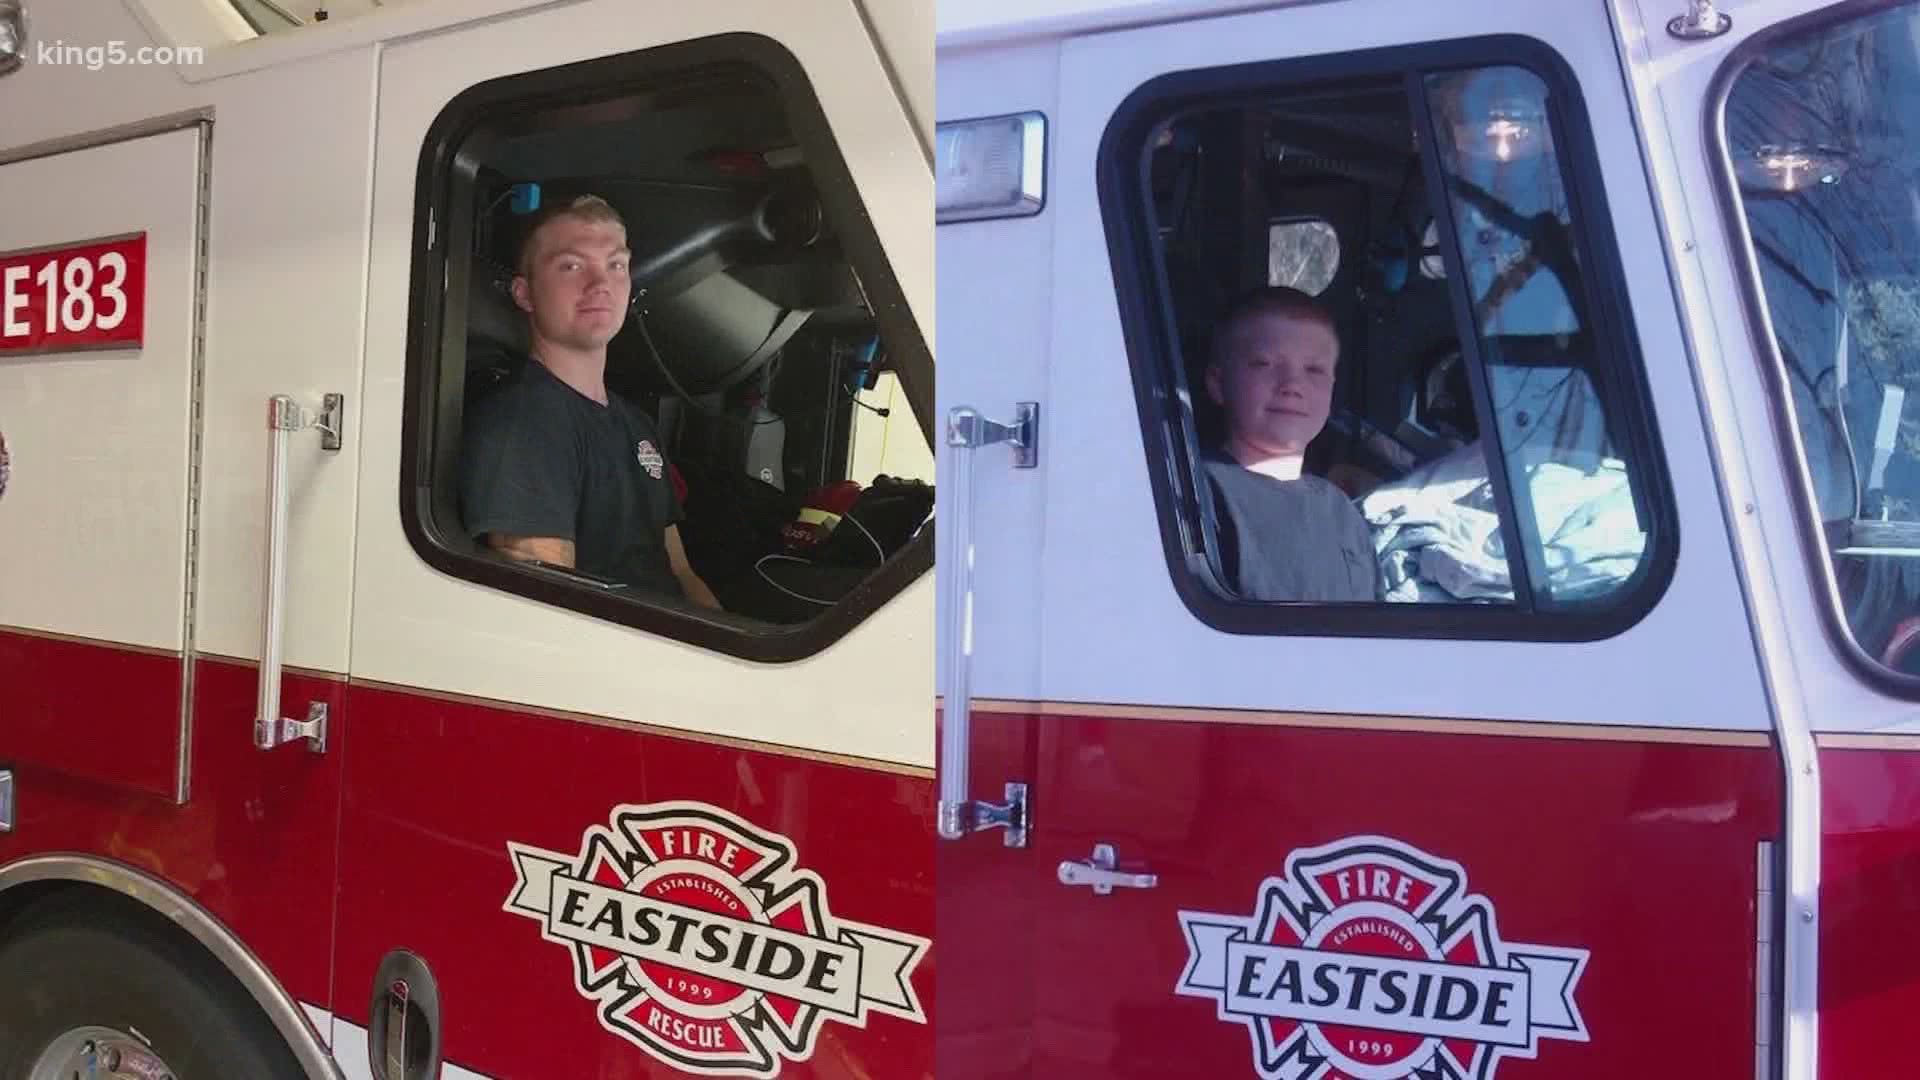 Lucas Storey spent his childhood hanging out at the firehouse and looking up to his firefighter uncle, and now as an adult, he's carrying on in his uncle's footsteps